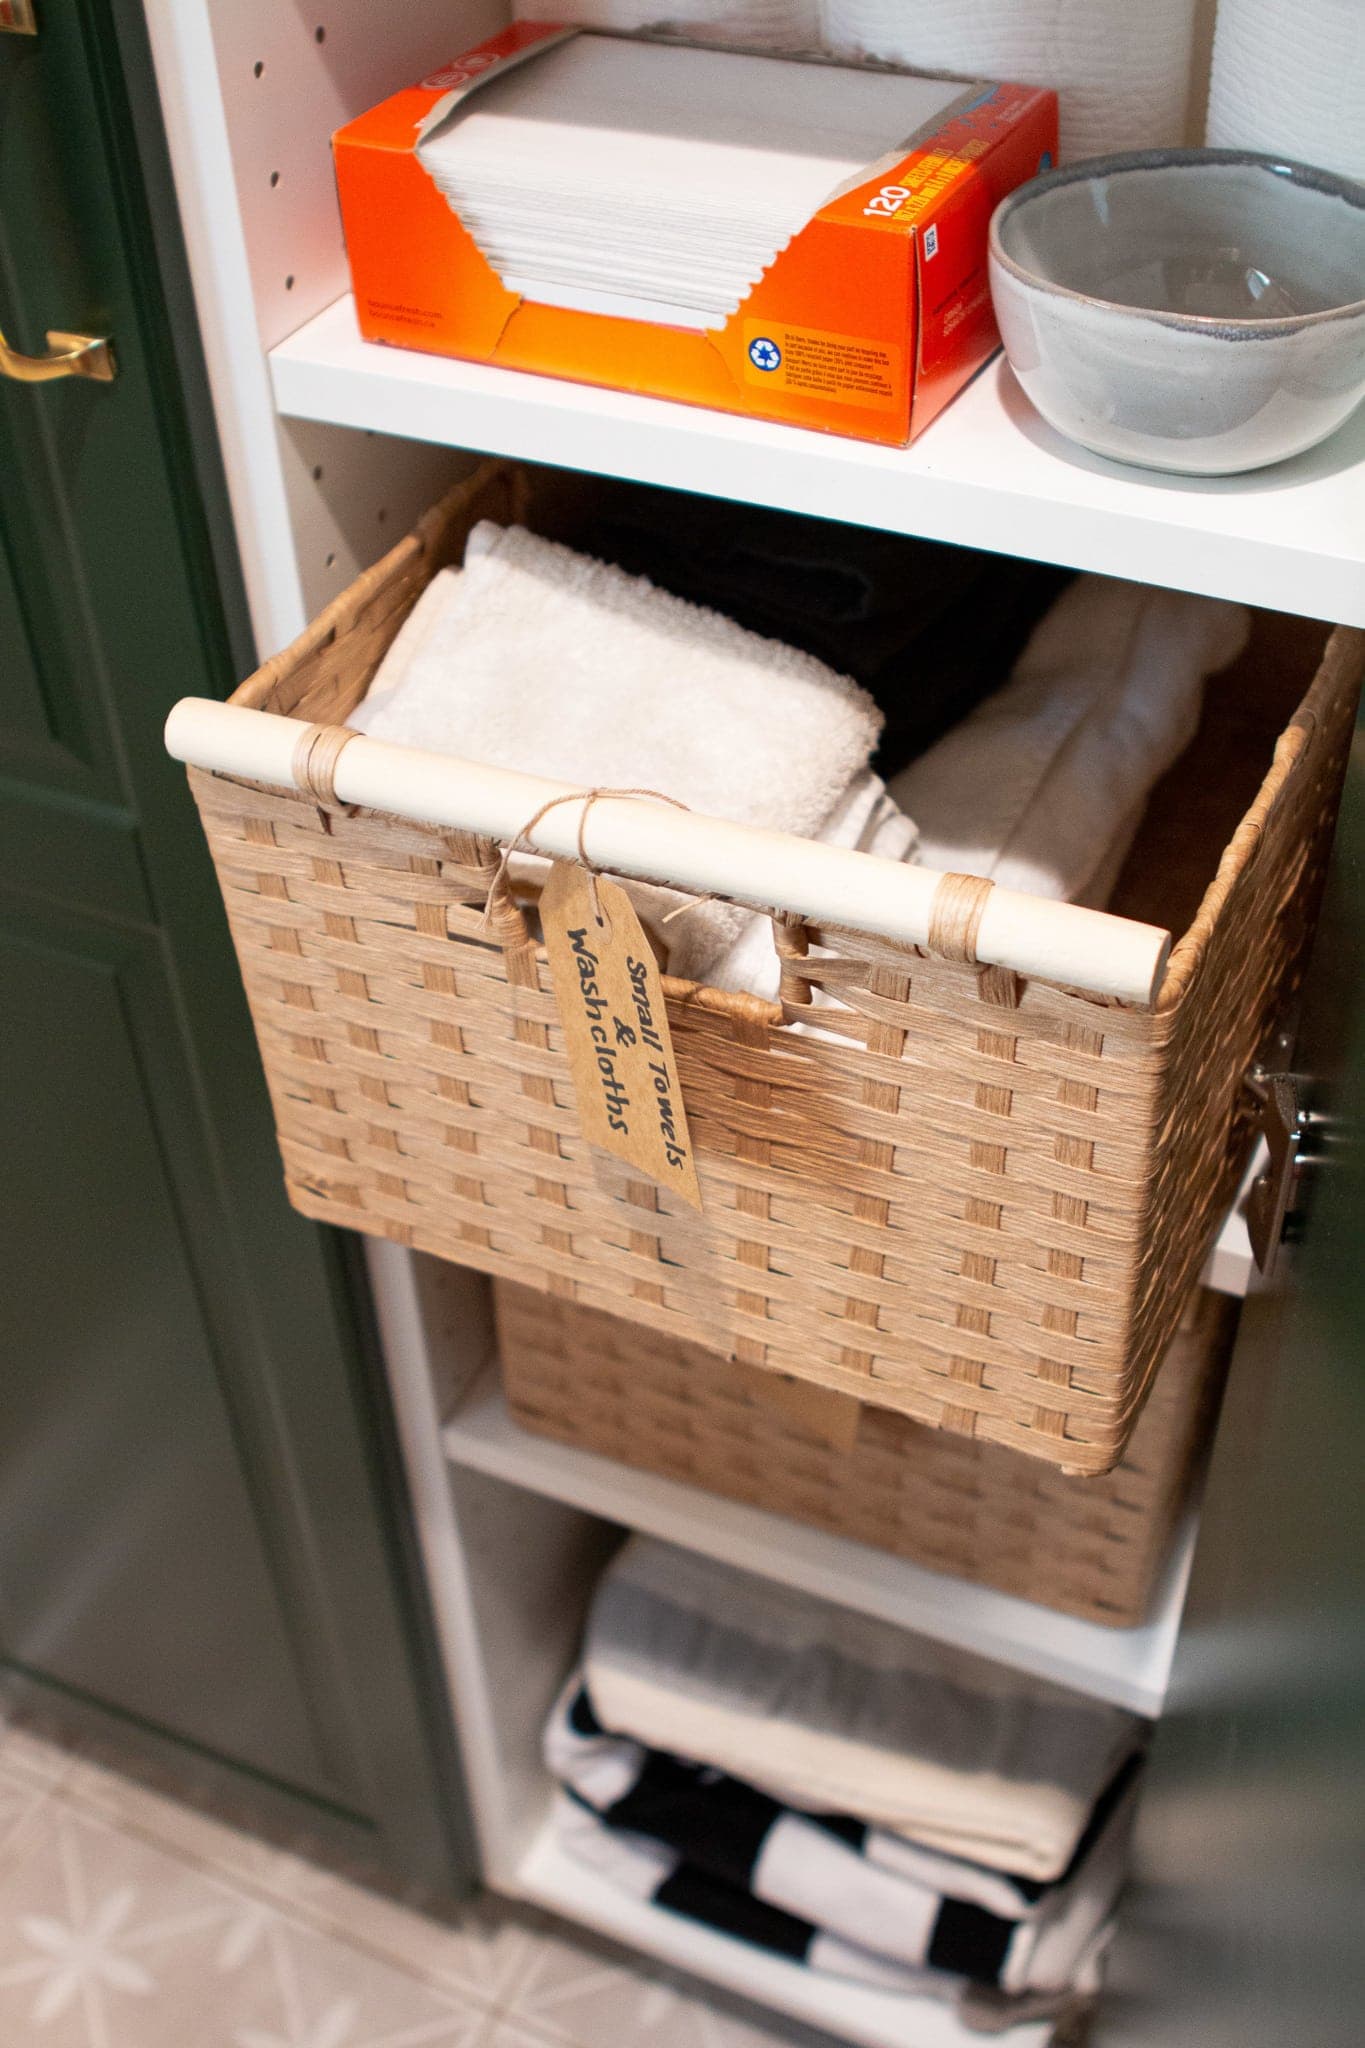 Basket for extra towels